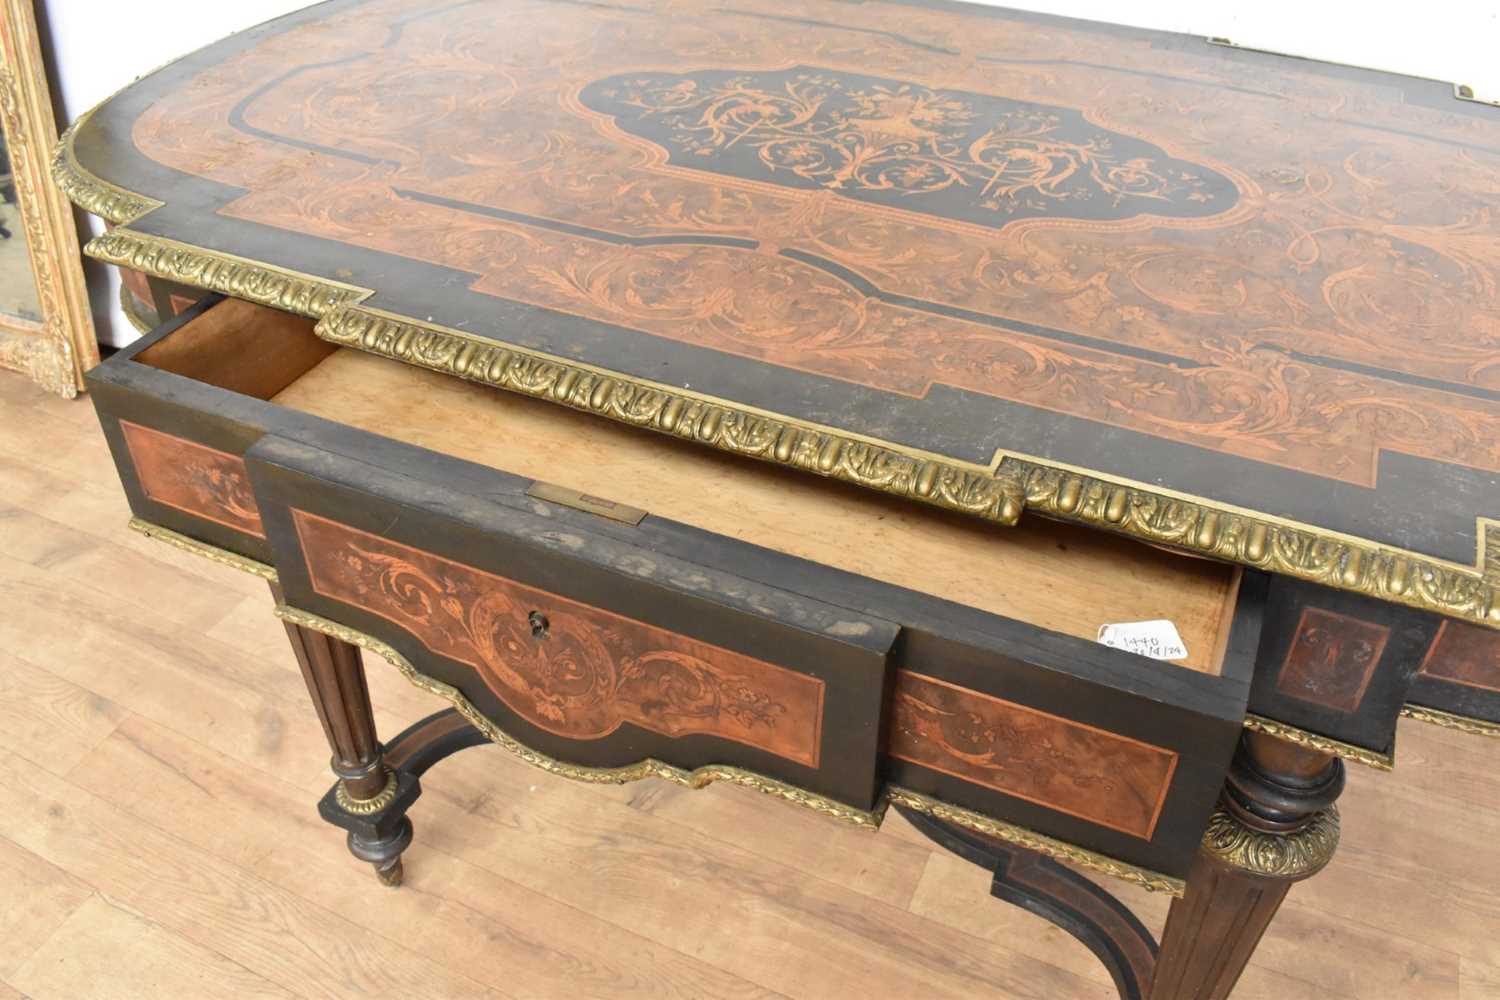 Good 19th century marquetry and ormolu mounted table - Image 7 of 17